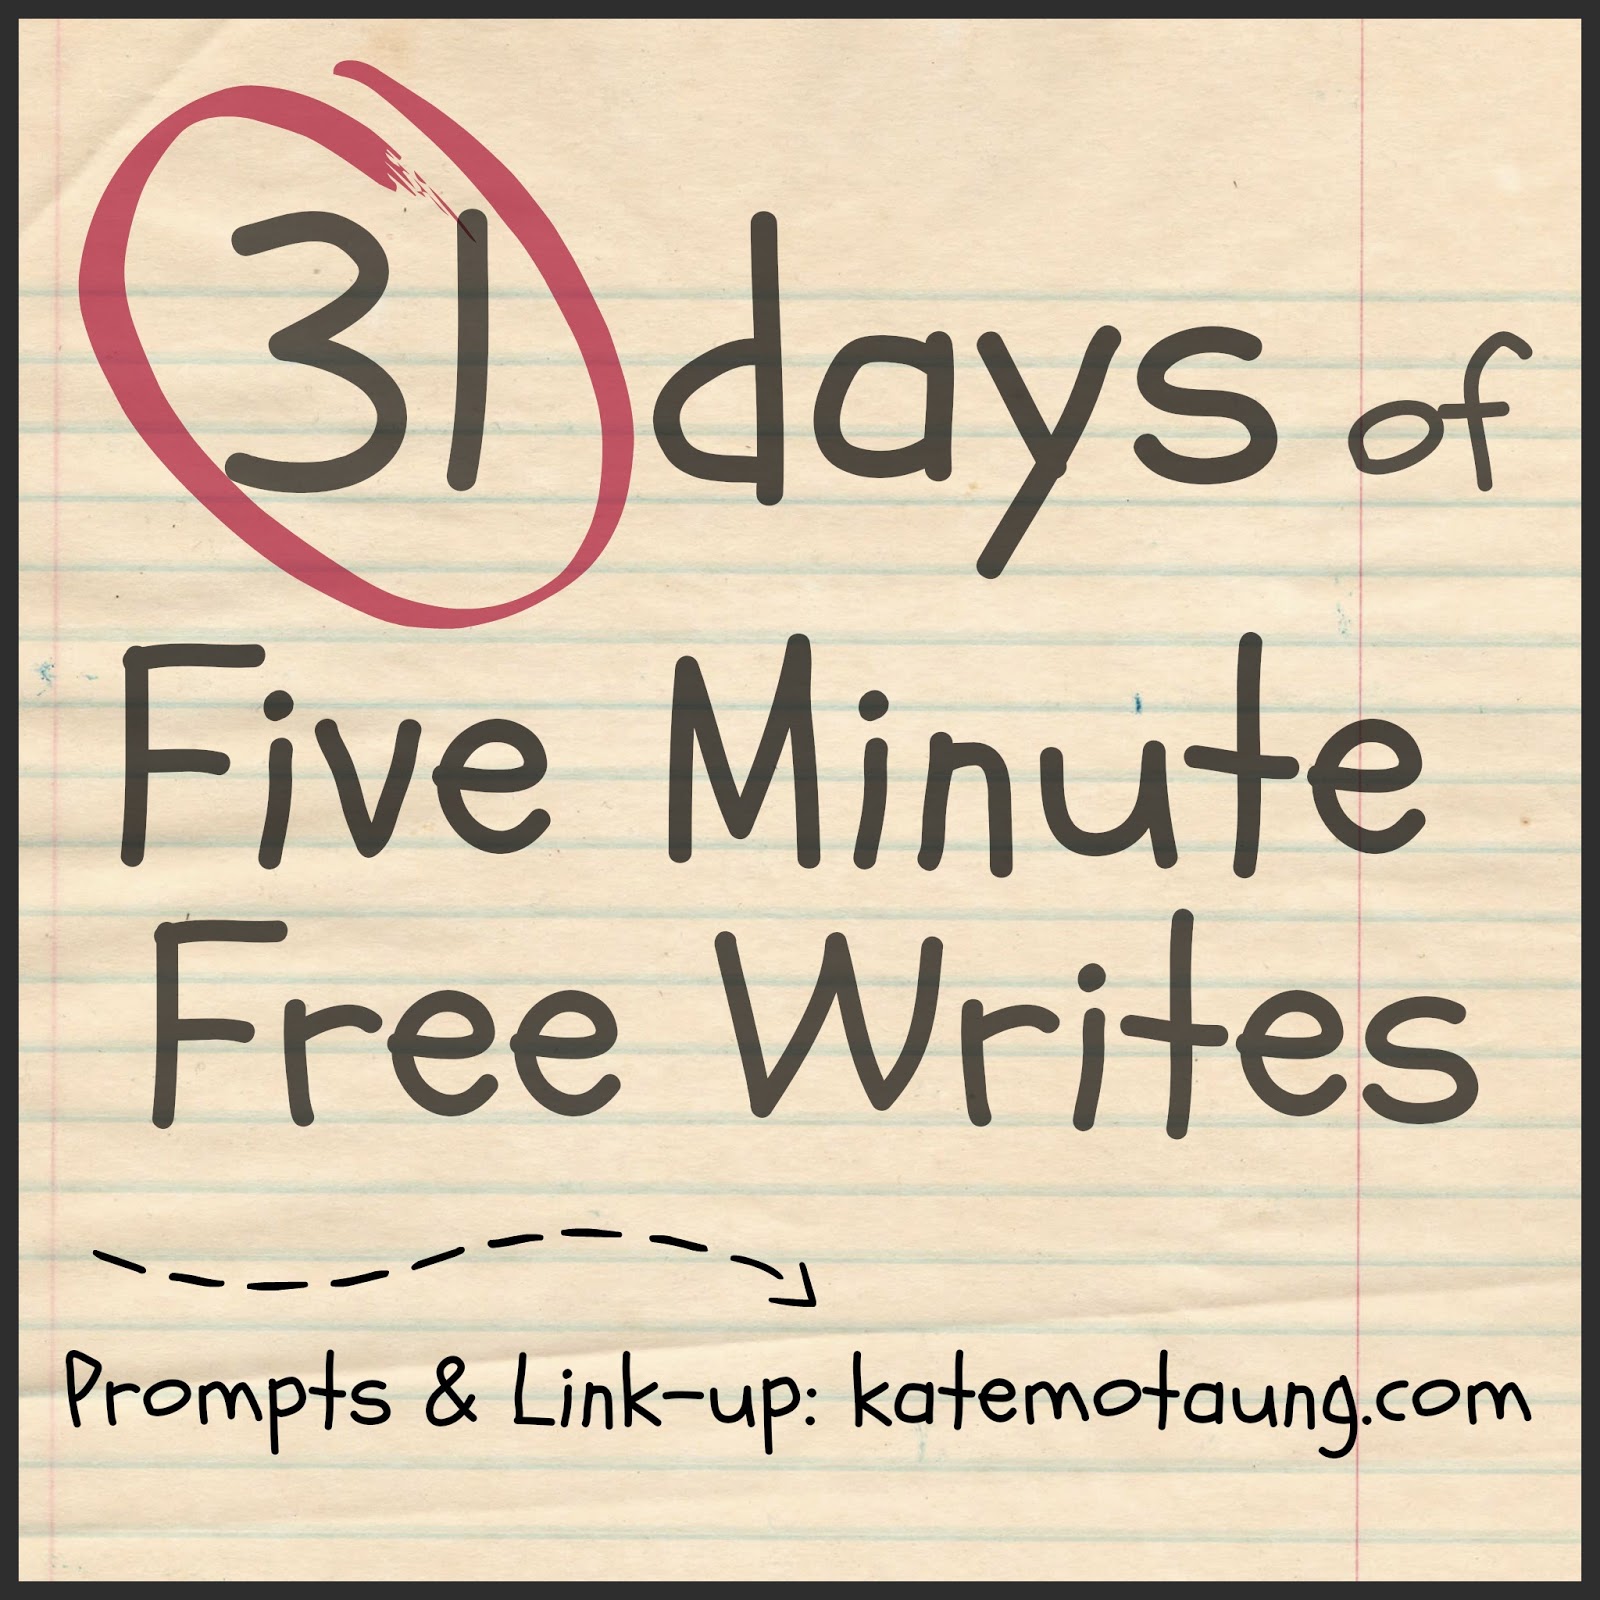 http://katemotaung.com/31-days-2/31-days-of-five-minute-free-writes-link-up-here/